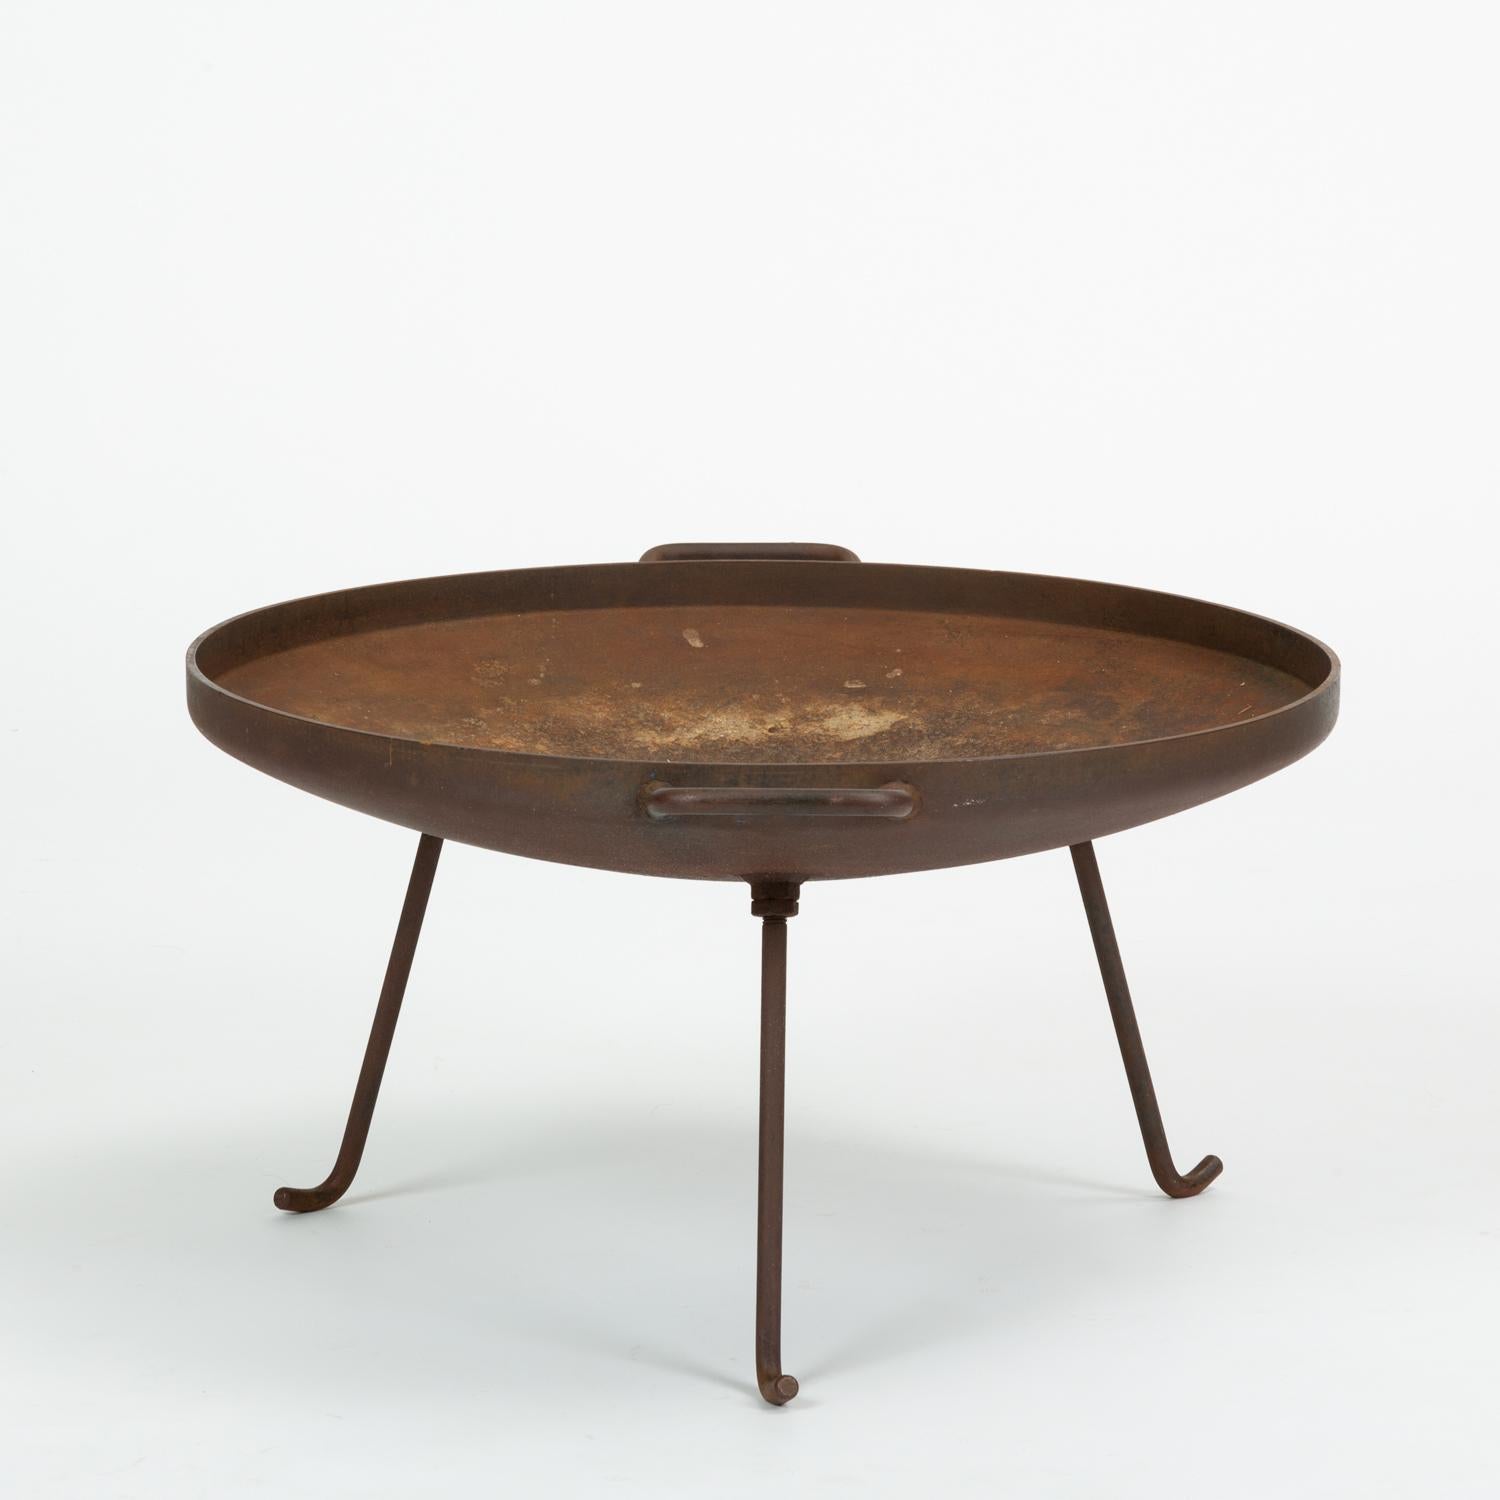 A three-legged iron barbecue or fire pit by Stan Hawk for his company Hawk House. A Case Study Program-approved design, the fire barbecue gave modernist form to an ancient instrument, sitting firmly on three iron legs with bent feet. The brazier